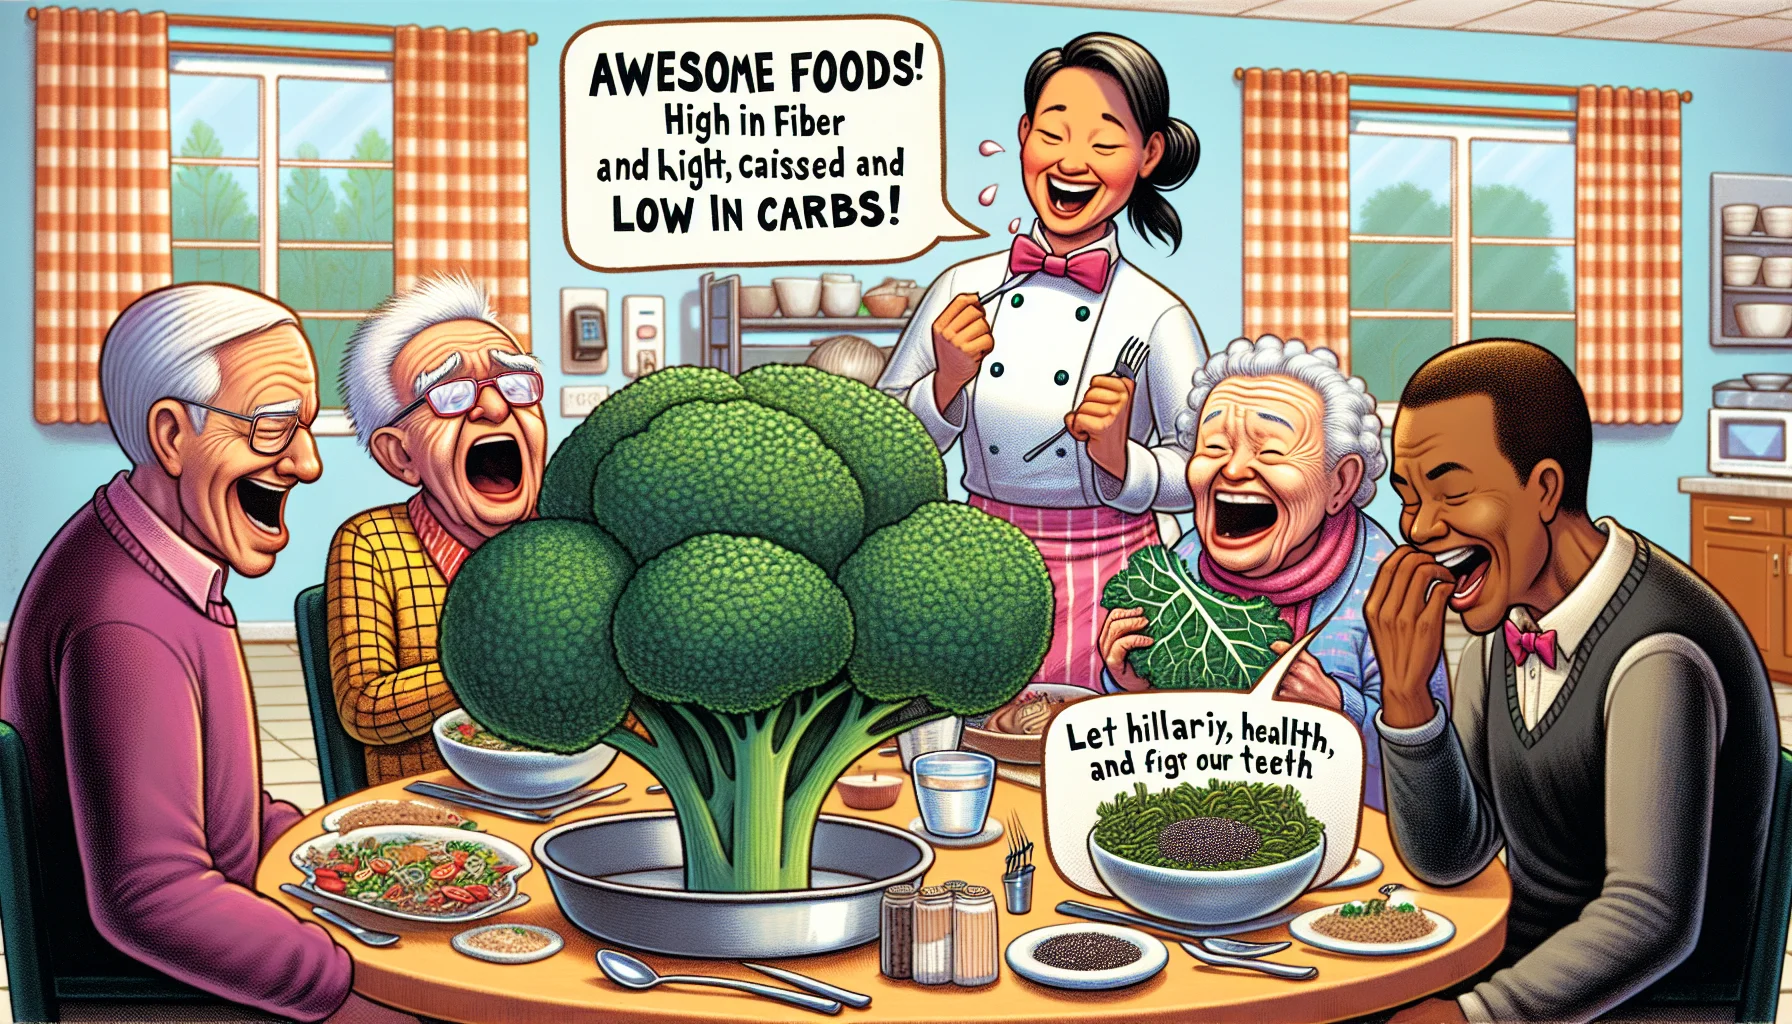 Imagine a humorous scene inside a retirement home's cafeteria. The menu of the day? Awesome foods high in fiber and low in carbs! A Caucasian elderly gentleman is astonished at the size of his giant broccoli while his Hispanic neighbor is trying to figure out how to eat an oversize chia seed pod without getting seeds in her teeth. Meanwhile, a Black elderly woman is privately rejoicing at the sight of an enormous bowl of kale salad, her favorite. A middle-aged South Asian chef is standing at one side with a playful smile, ready to serve an appetizing plate of quinoa. Let hilarity, health, fiber, and low carbs be at the highlight of their energetic expressions.